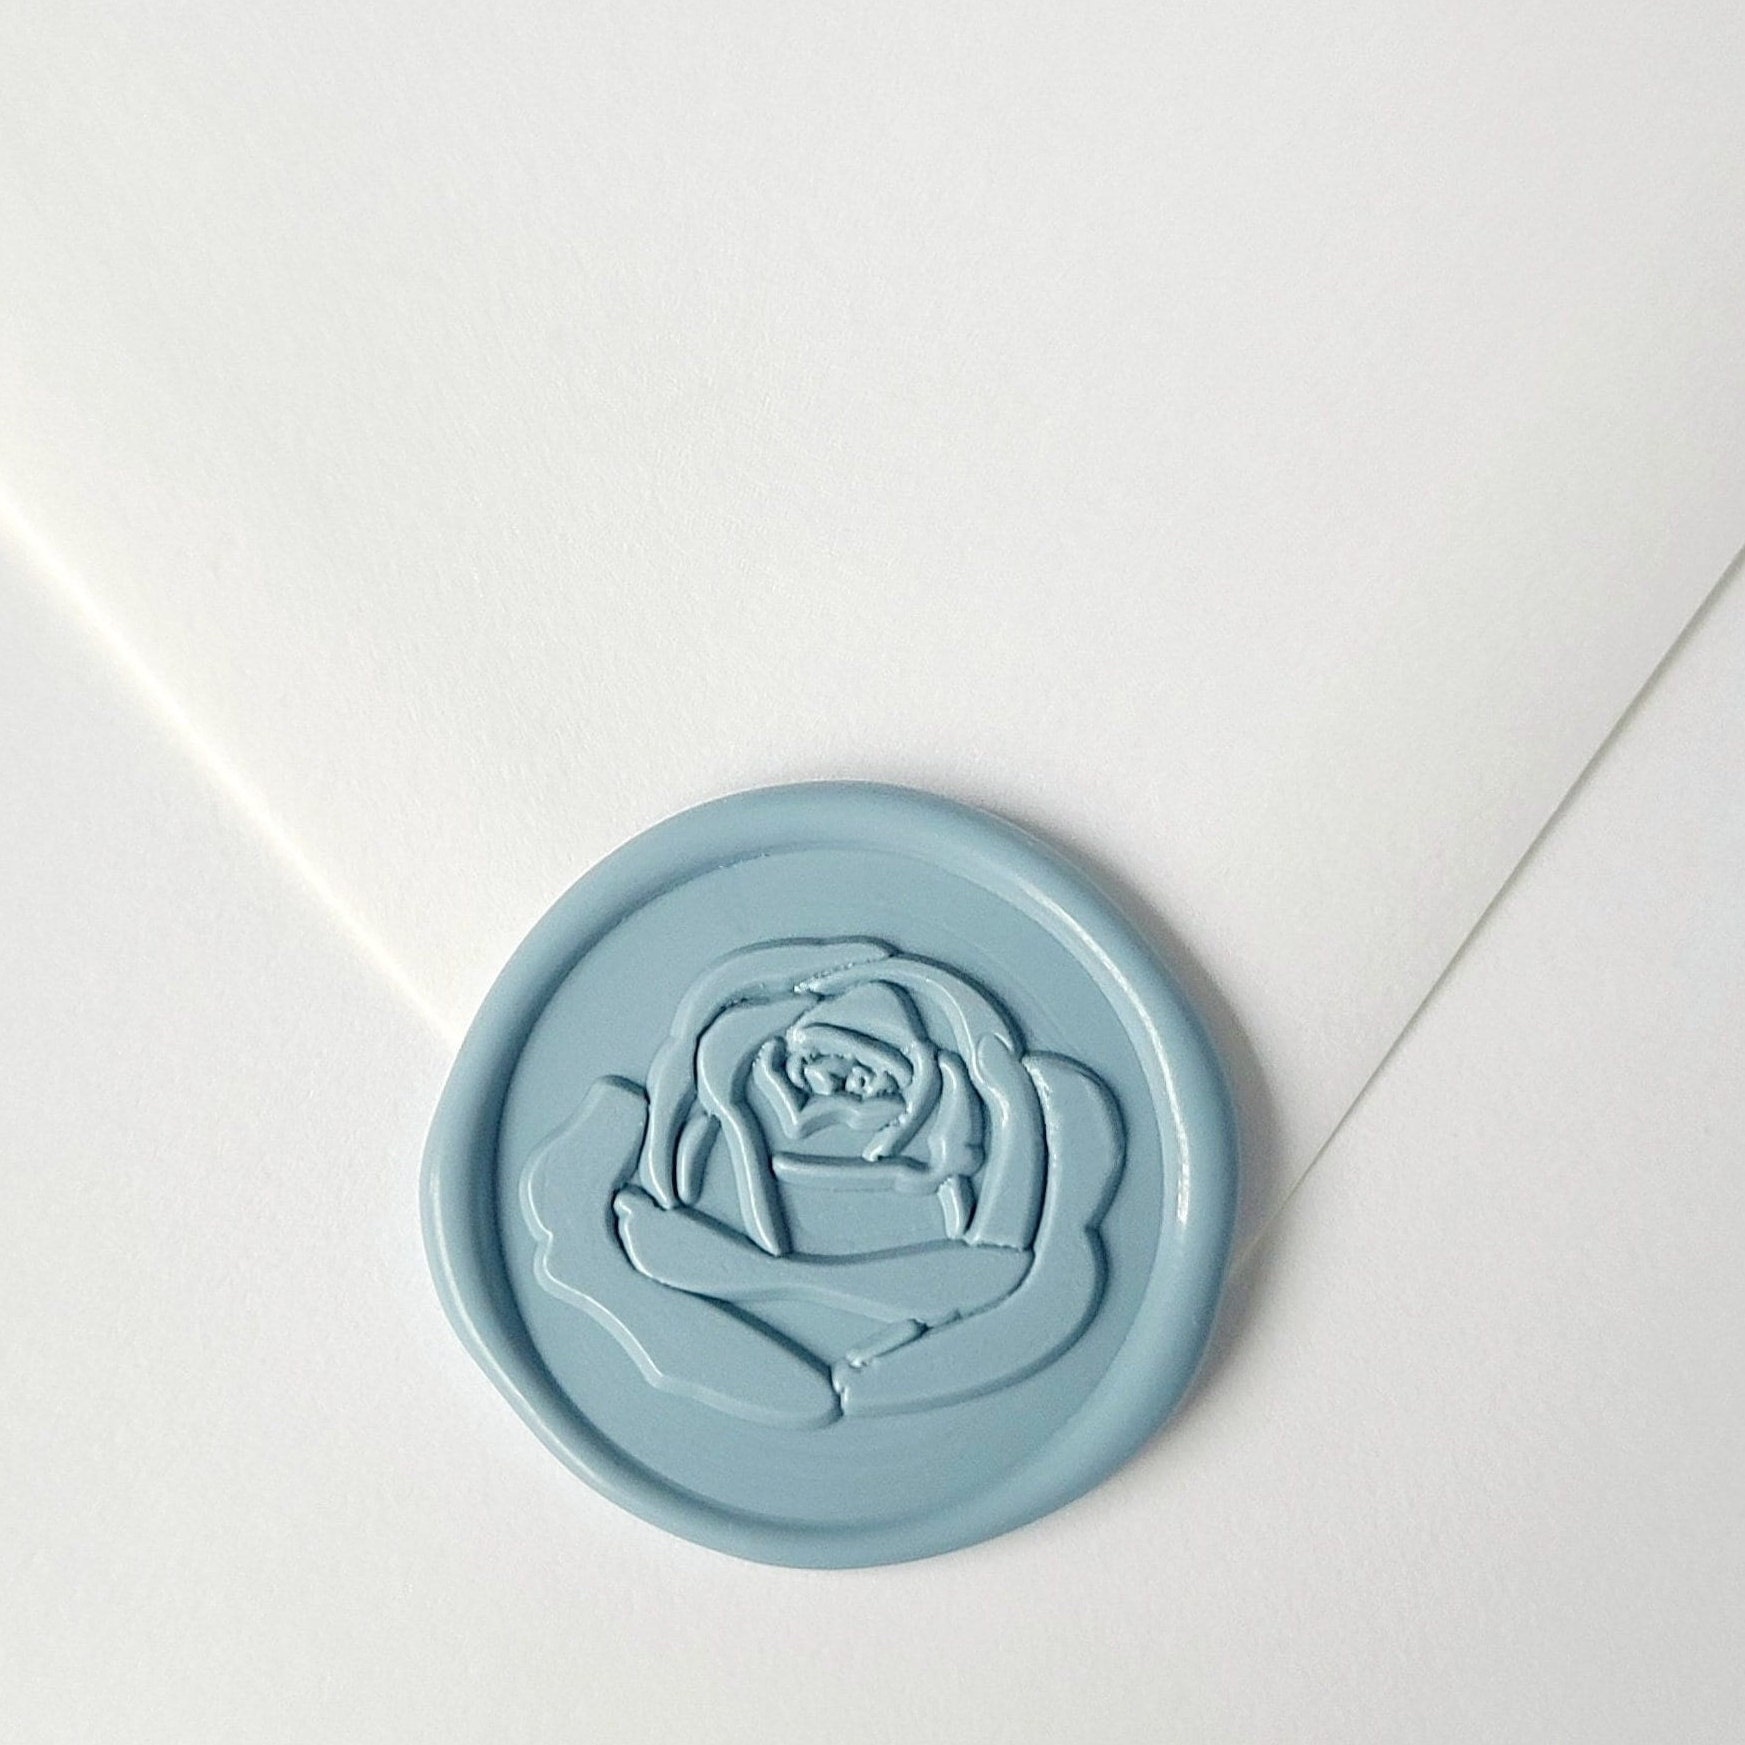 Linen warm nude roses wax seal stickers | Set of 10 Marketplace Wax Seals  by undefined